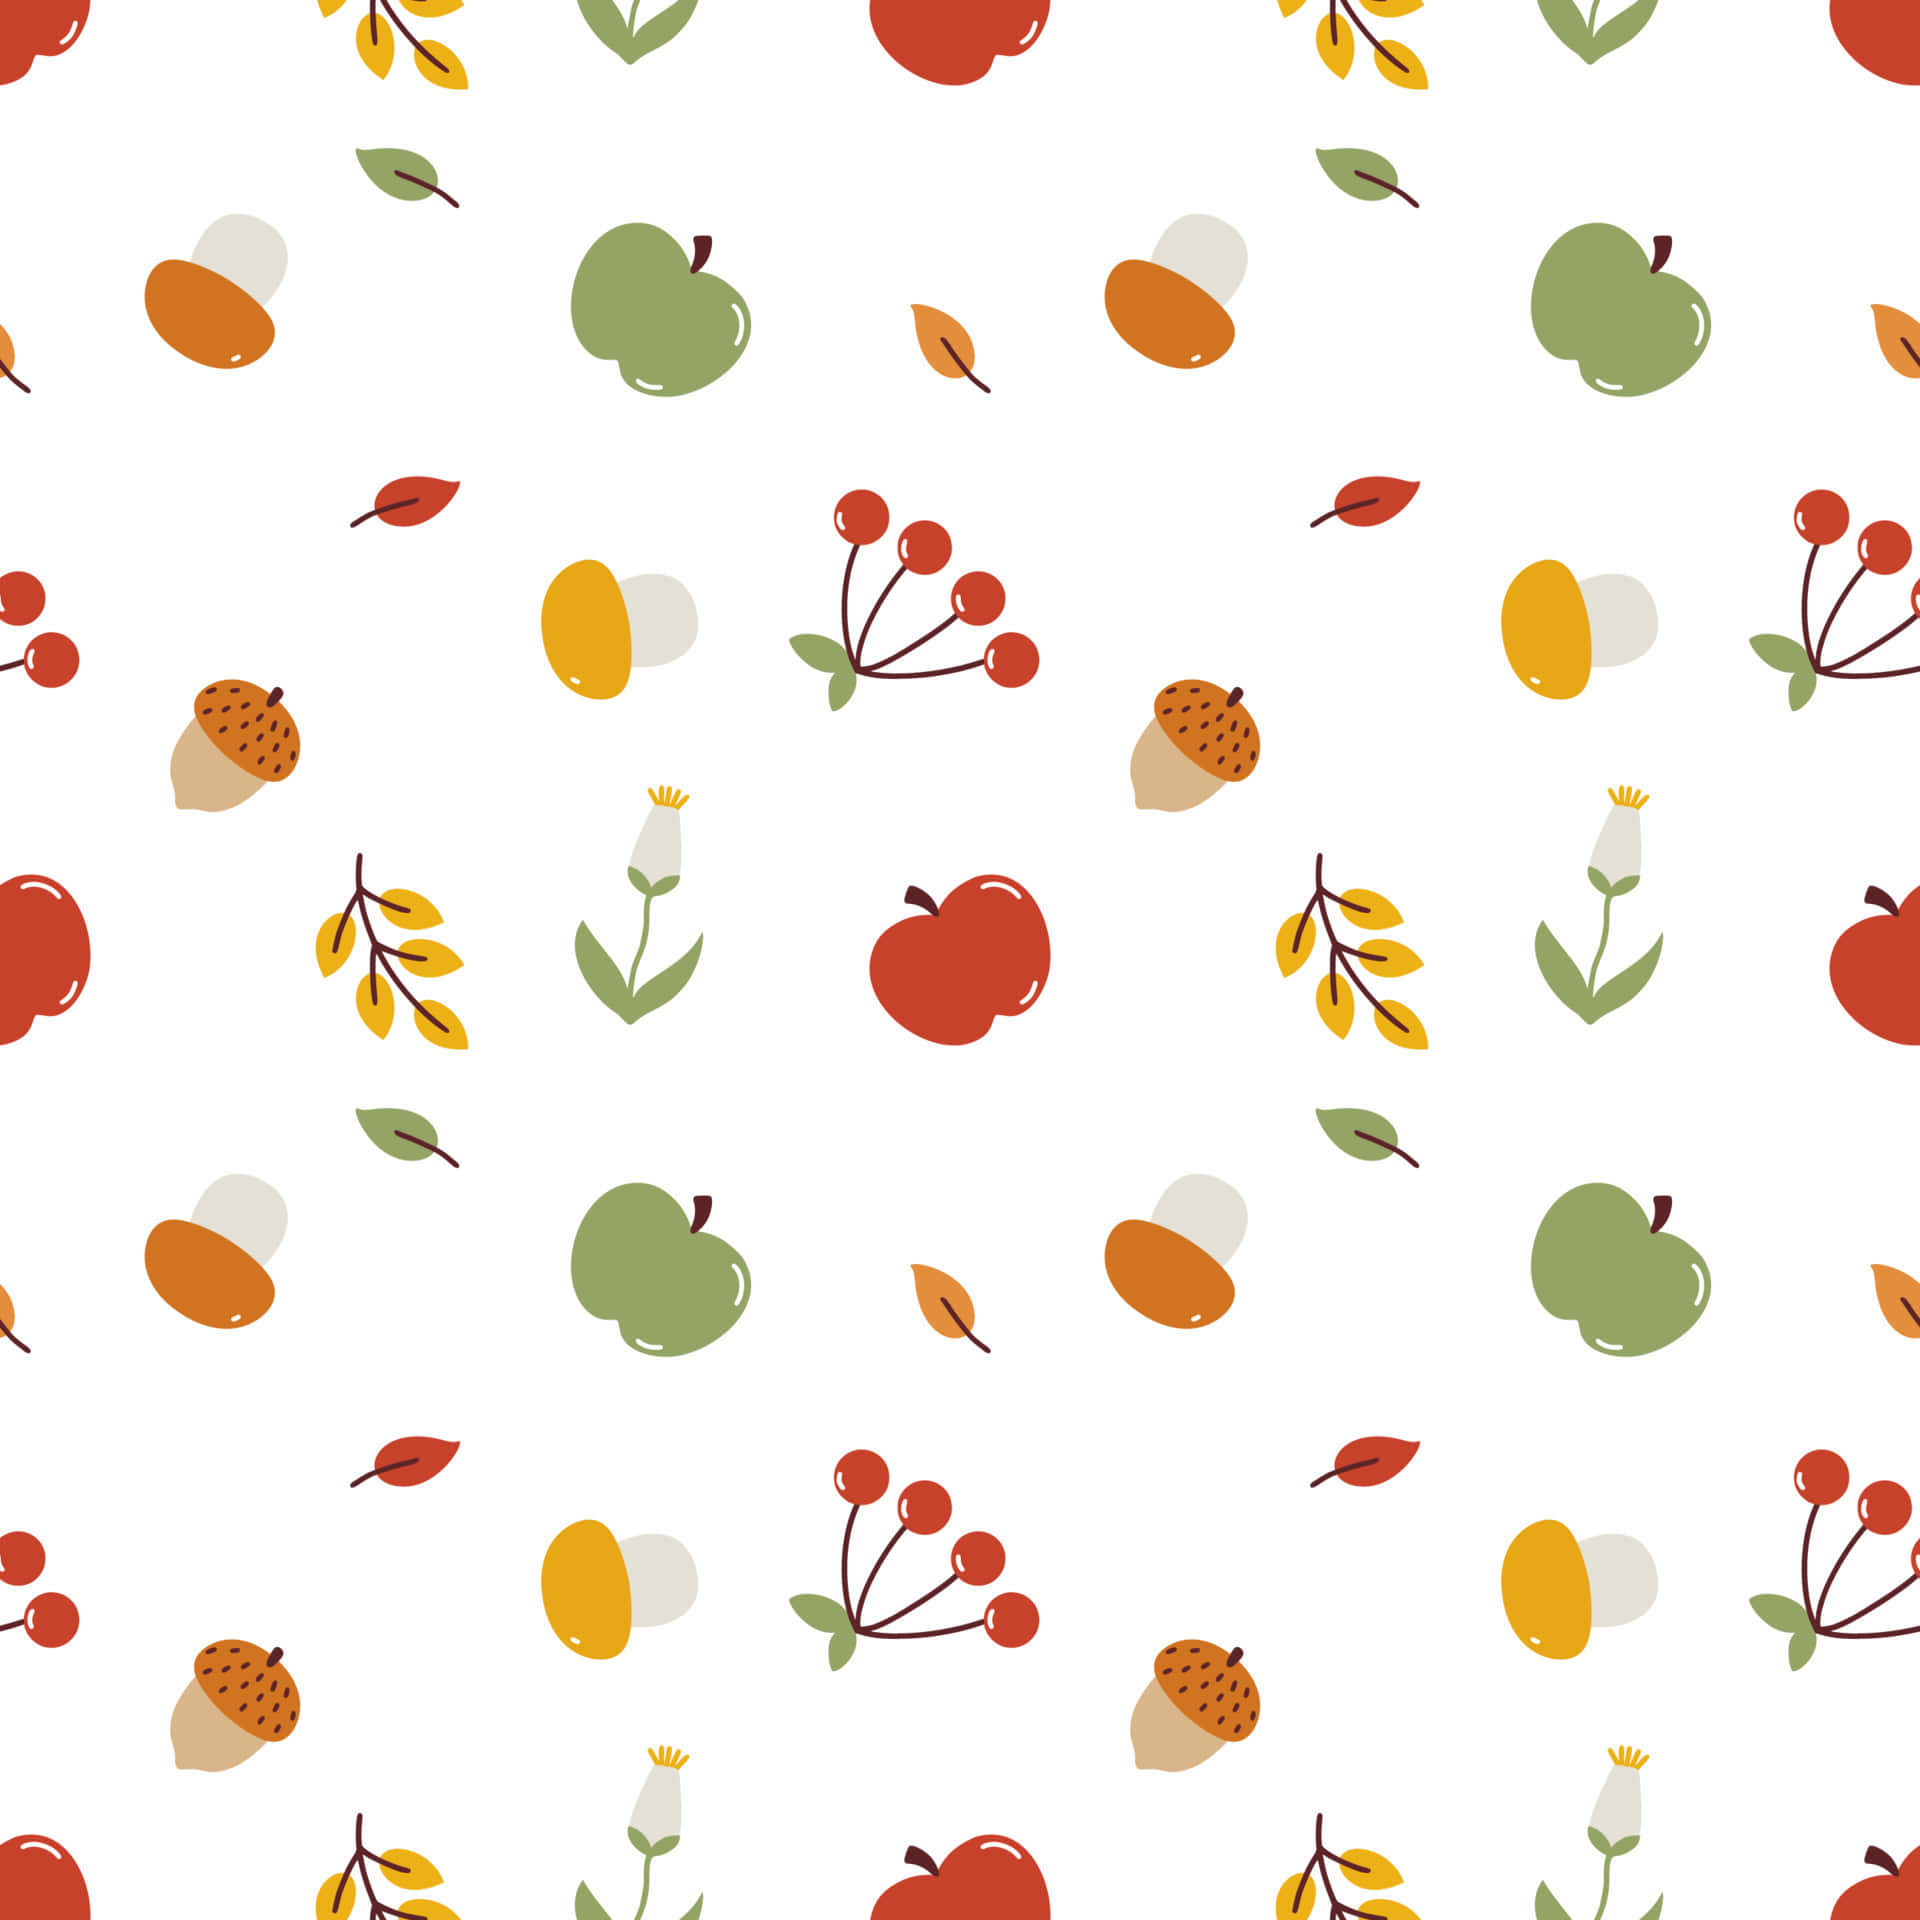 Get into the fall spirit with this adorable pattern! Wallpaper